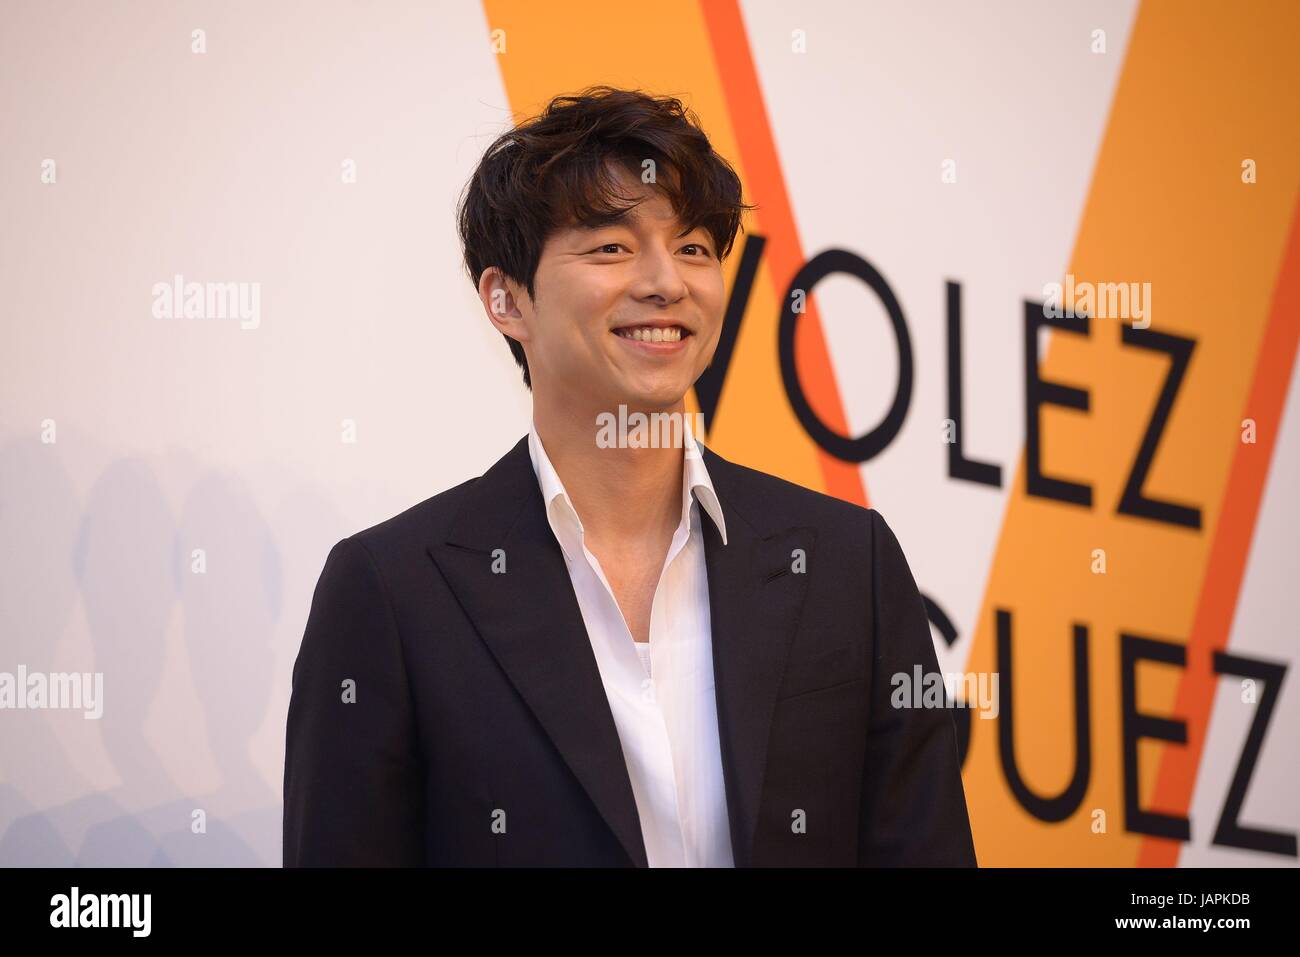 Gong Yoo Arriving Louis Vuitton Show Editorial Stock Photo - Stock Image